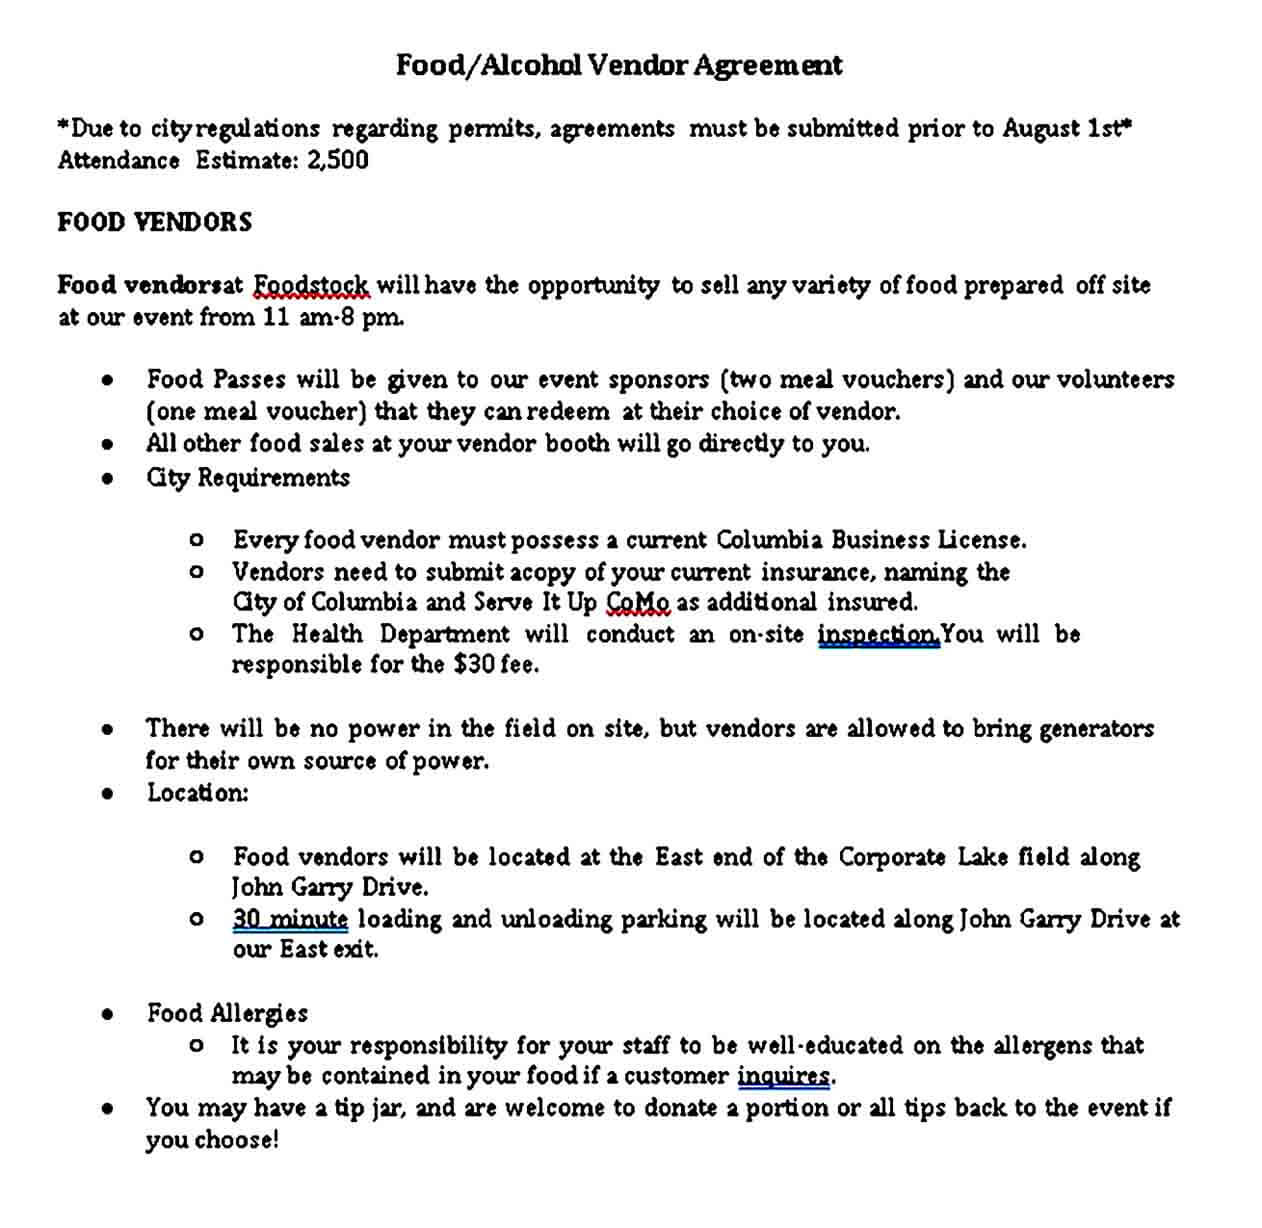 Restaurant Food and Alcohol Vendor Agreement